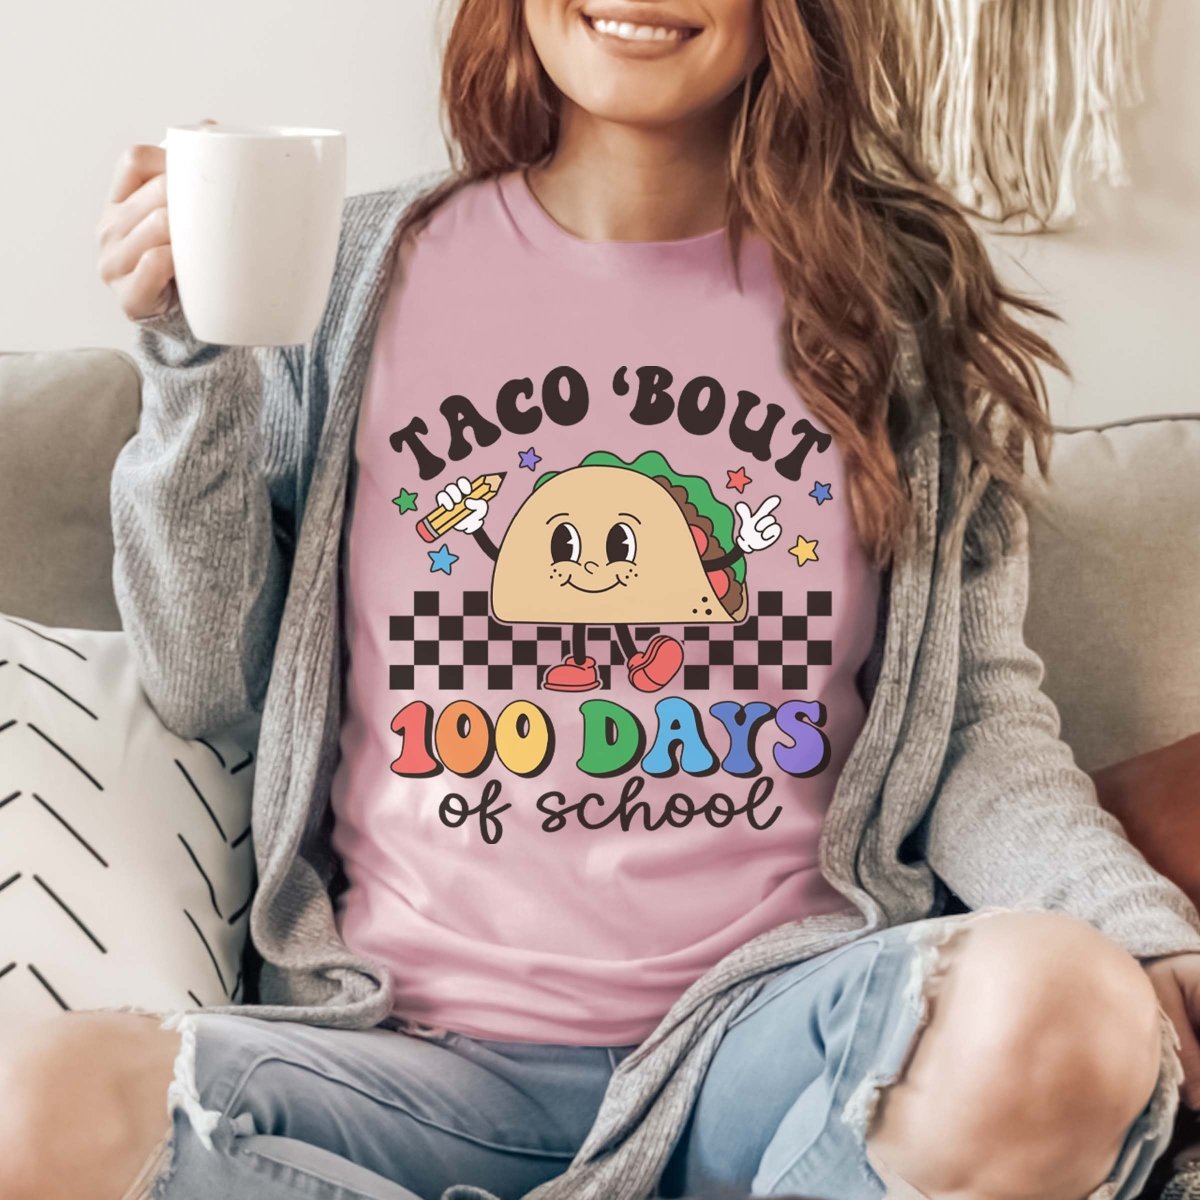 Let's Taco About 100 Days Tee - Limeberry Designs